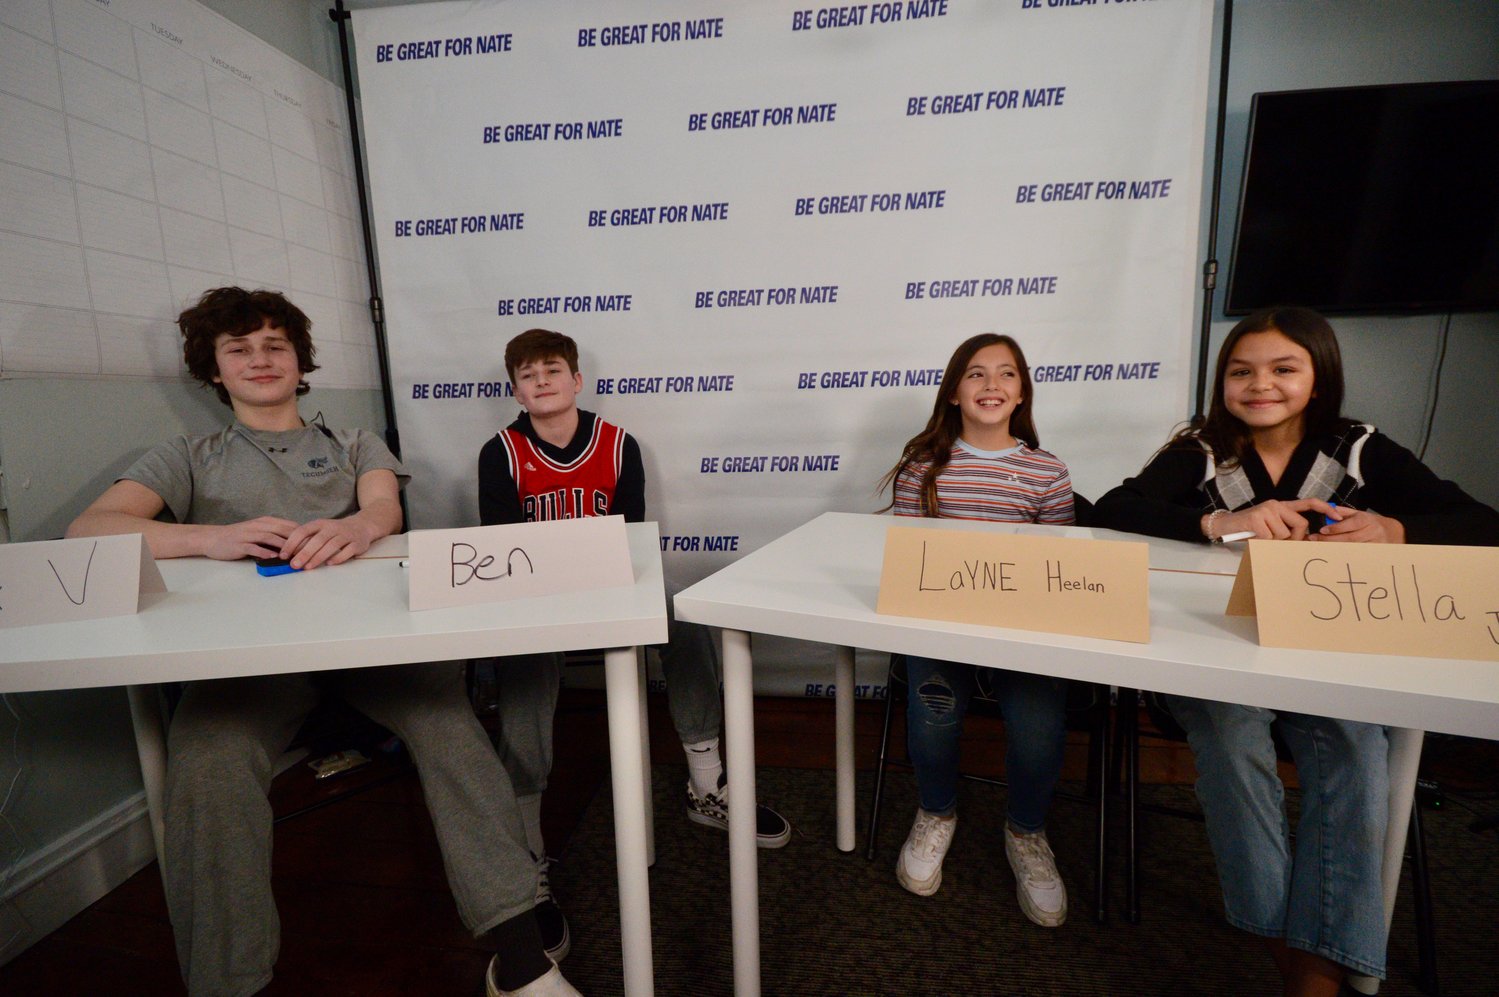 “Are You Smarter Than a Fifth-Grader?” contestants Jack Vouté, Ben Lopes, Layne Heelan, and Stella Johnson (from left) before the show started.